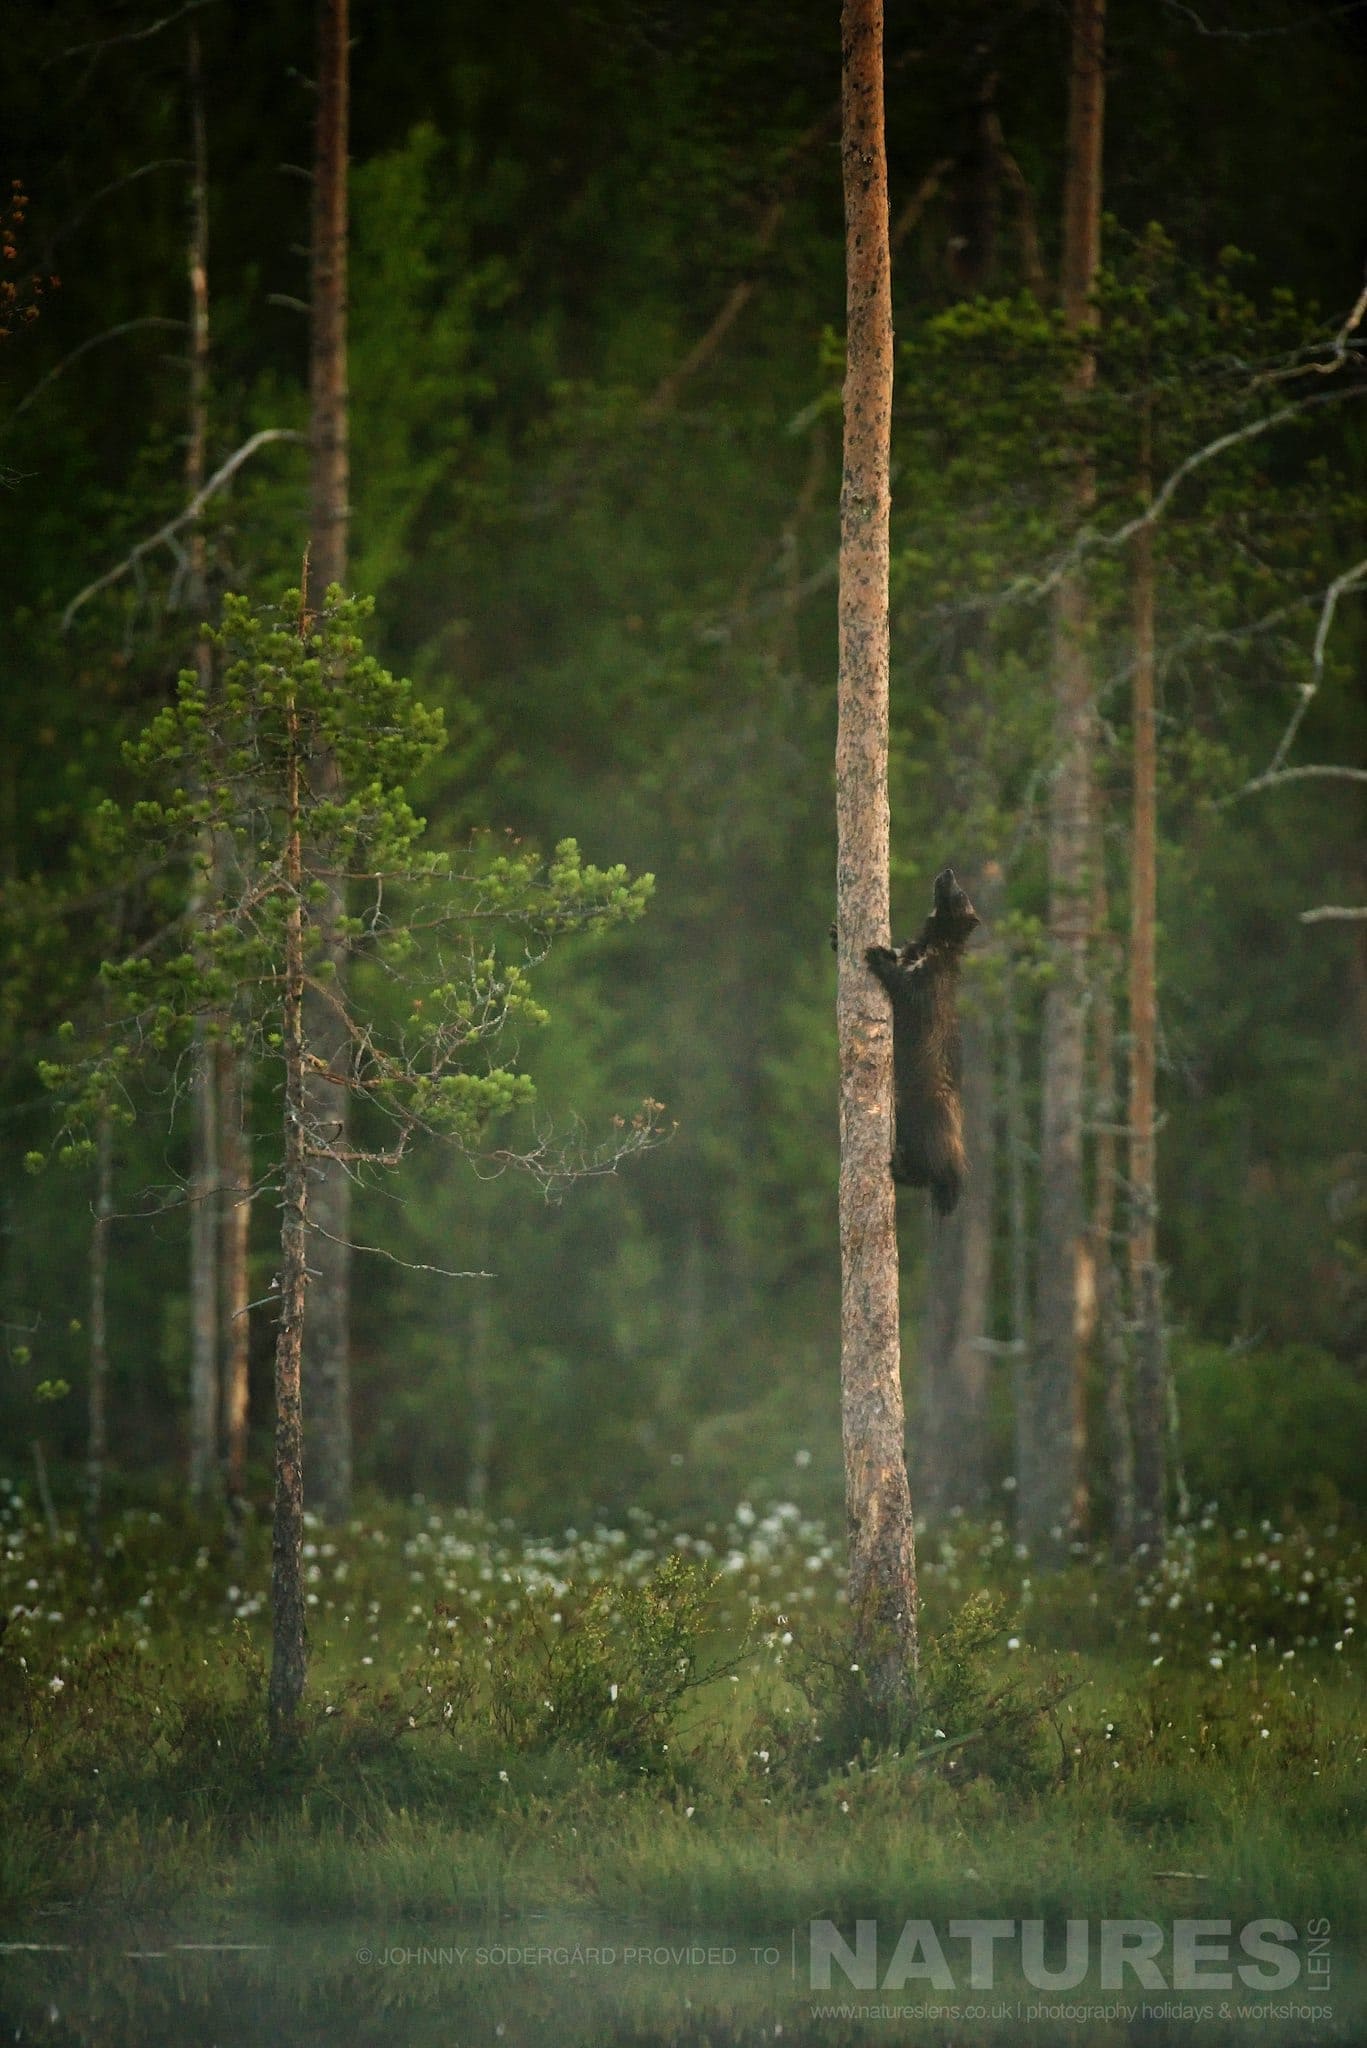 An Extremely Dextrous Wolverine Climbing A Tree Photographed By Johnny Södergård During The Natureslens Wild Brown Bears Of Finland Photography Holiday